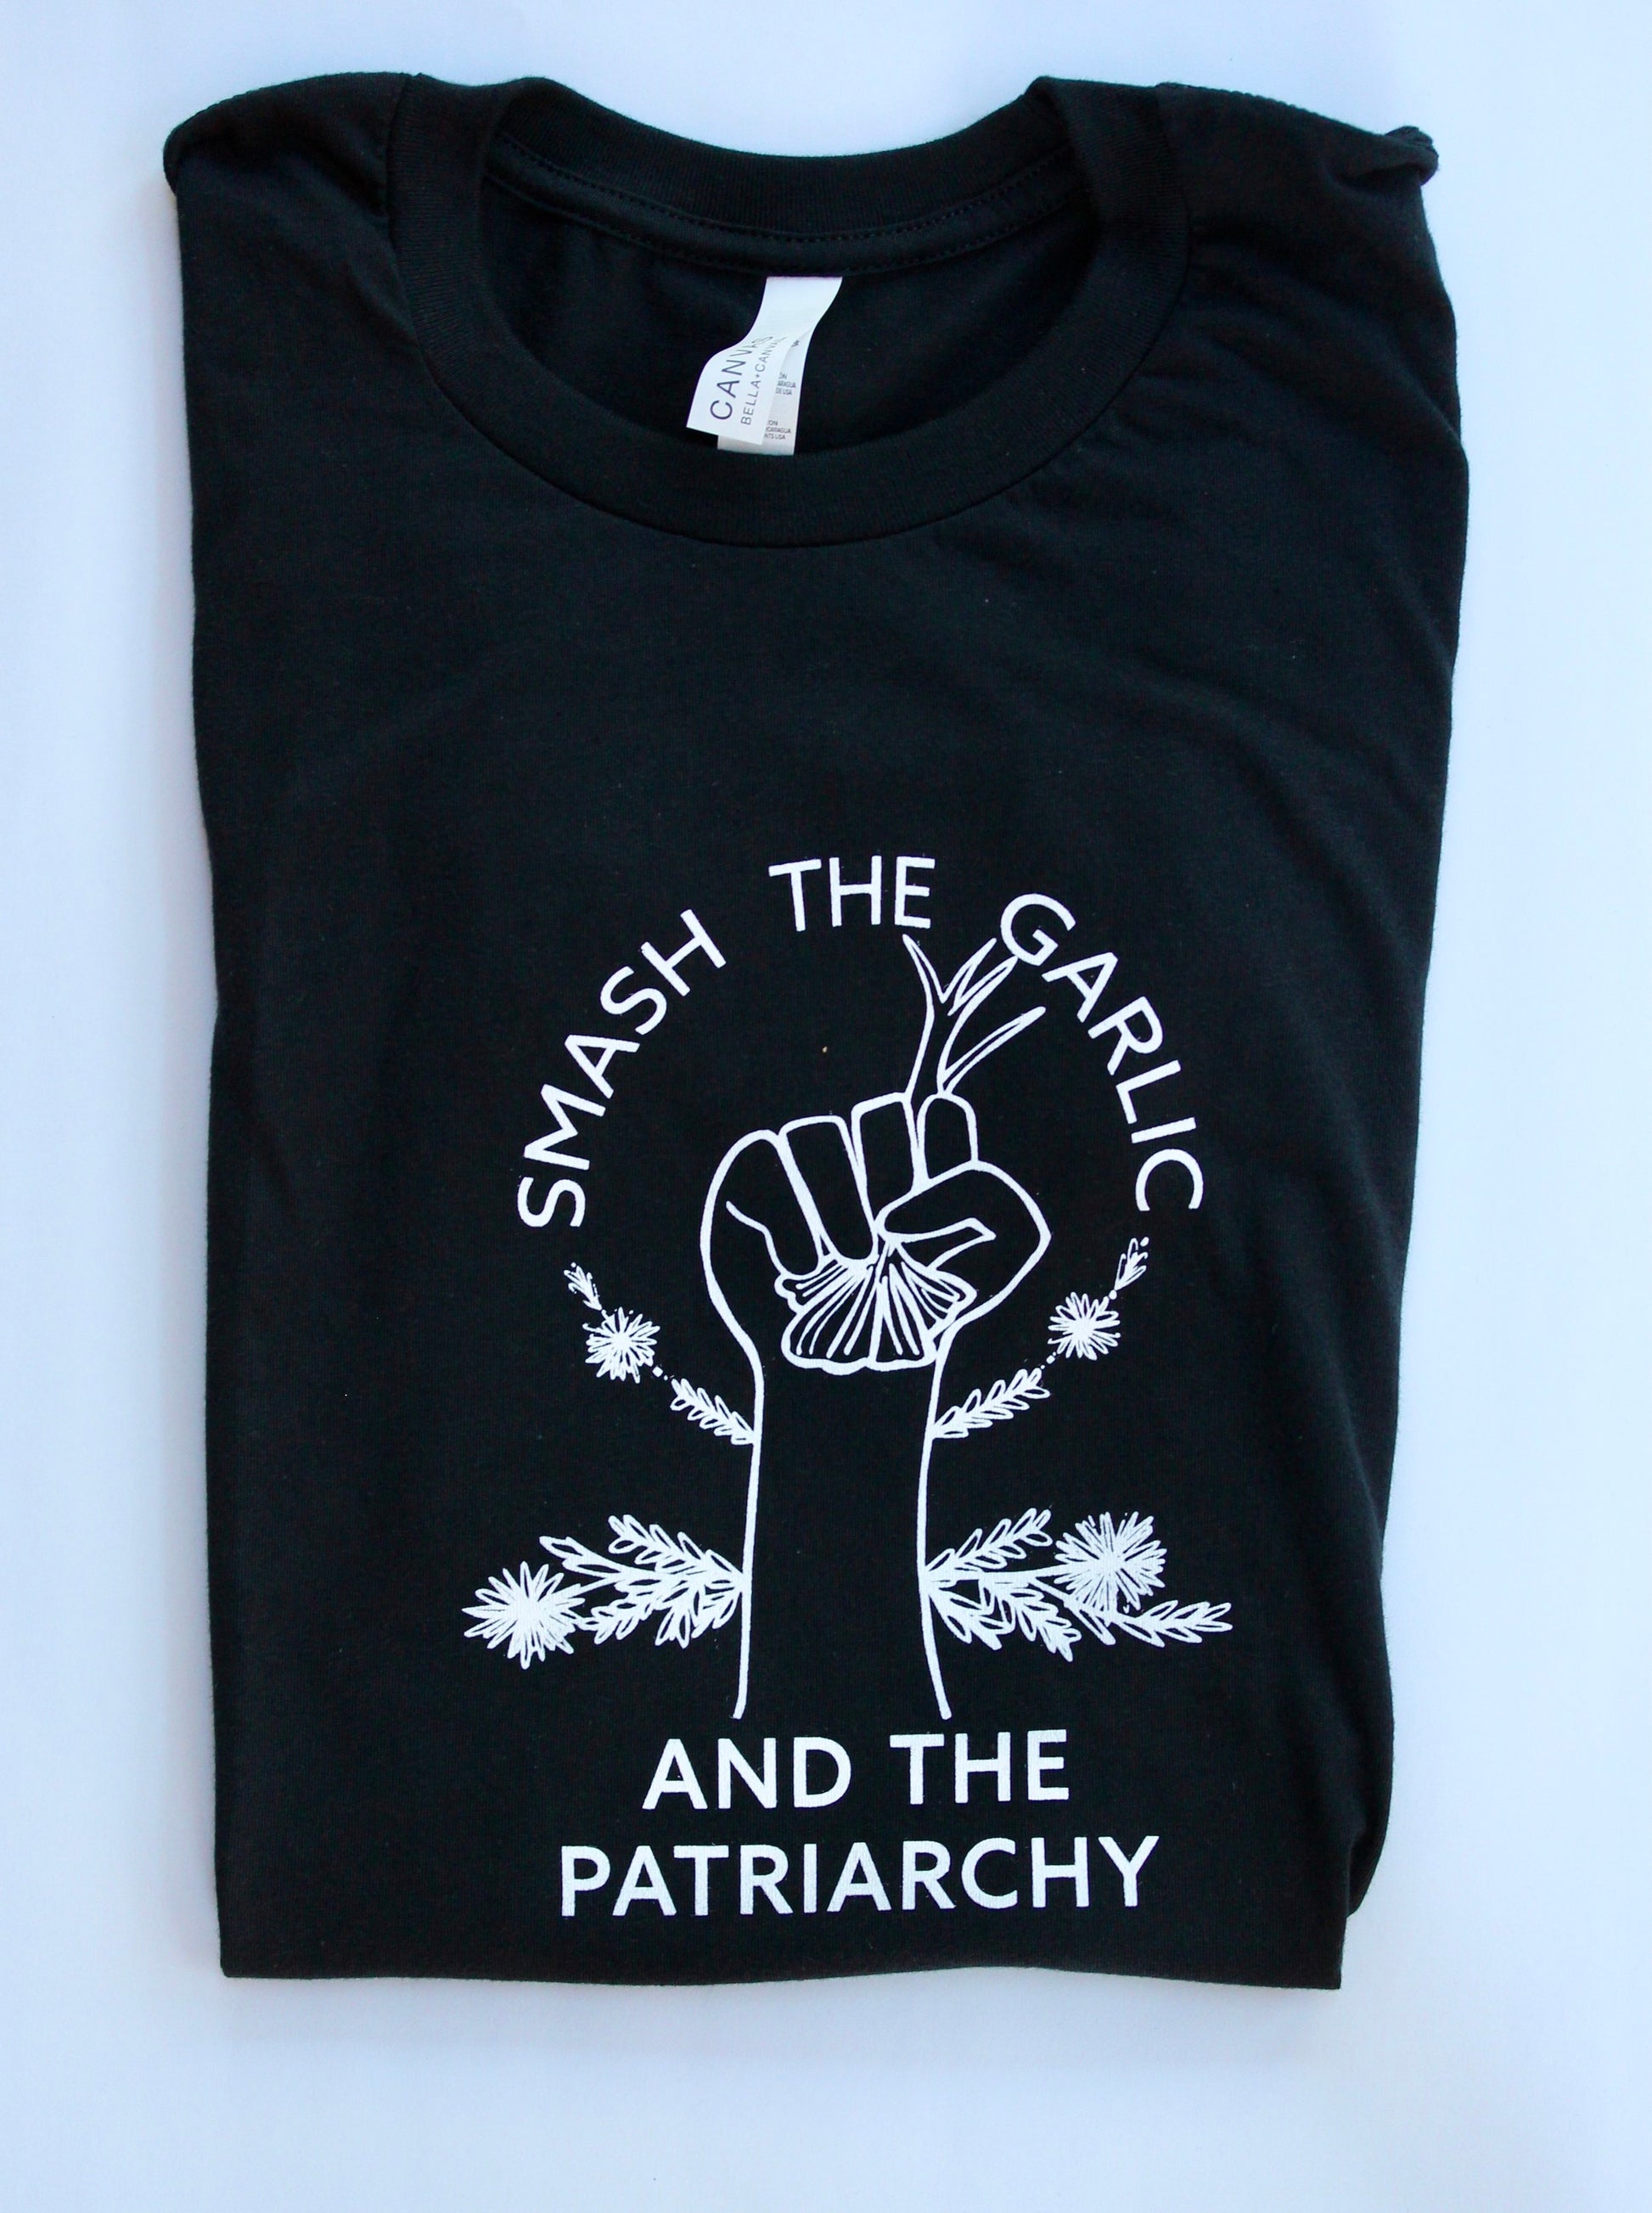 A folded black tee with white lettering reads "Smash the Garlic and the Patriarchy" with a garlic illustration 